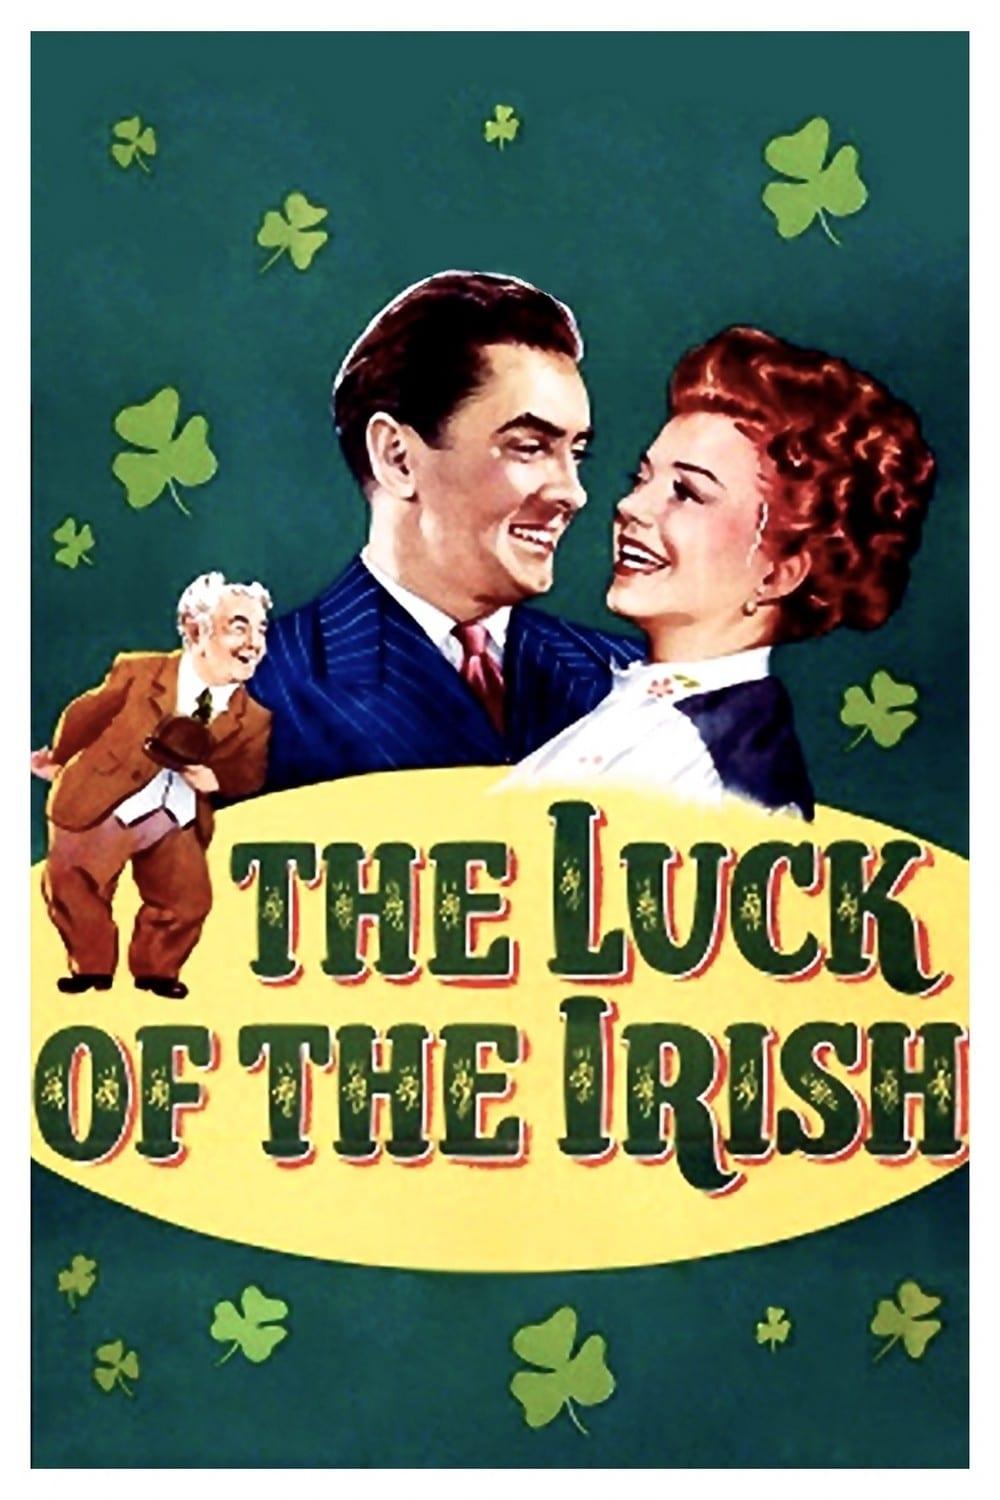 The Luck of the Irish poster